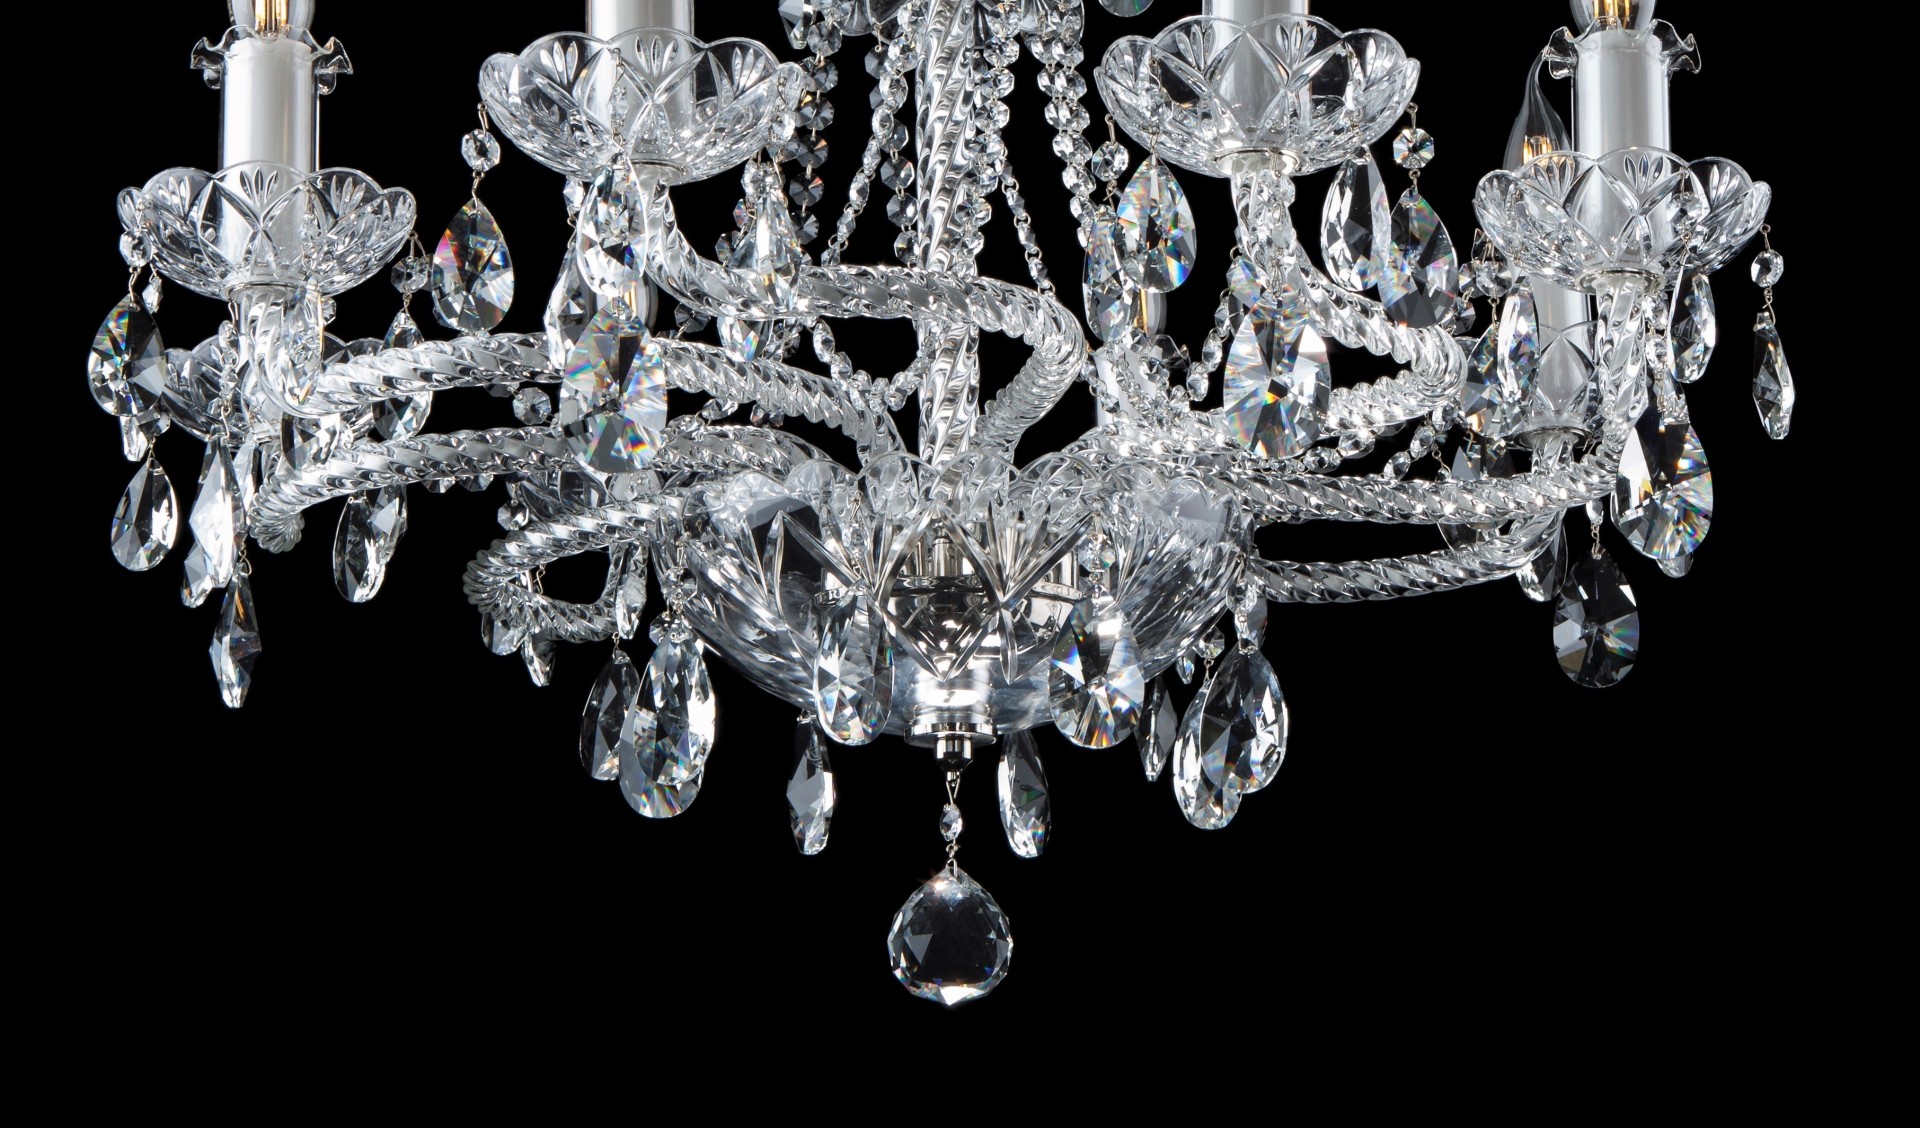 8-arm silver crystal chandelier with twisted glass arms clockwise